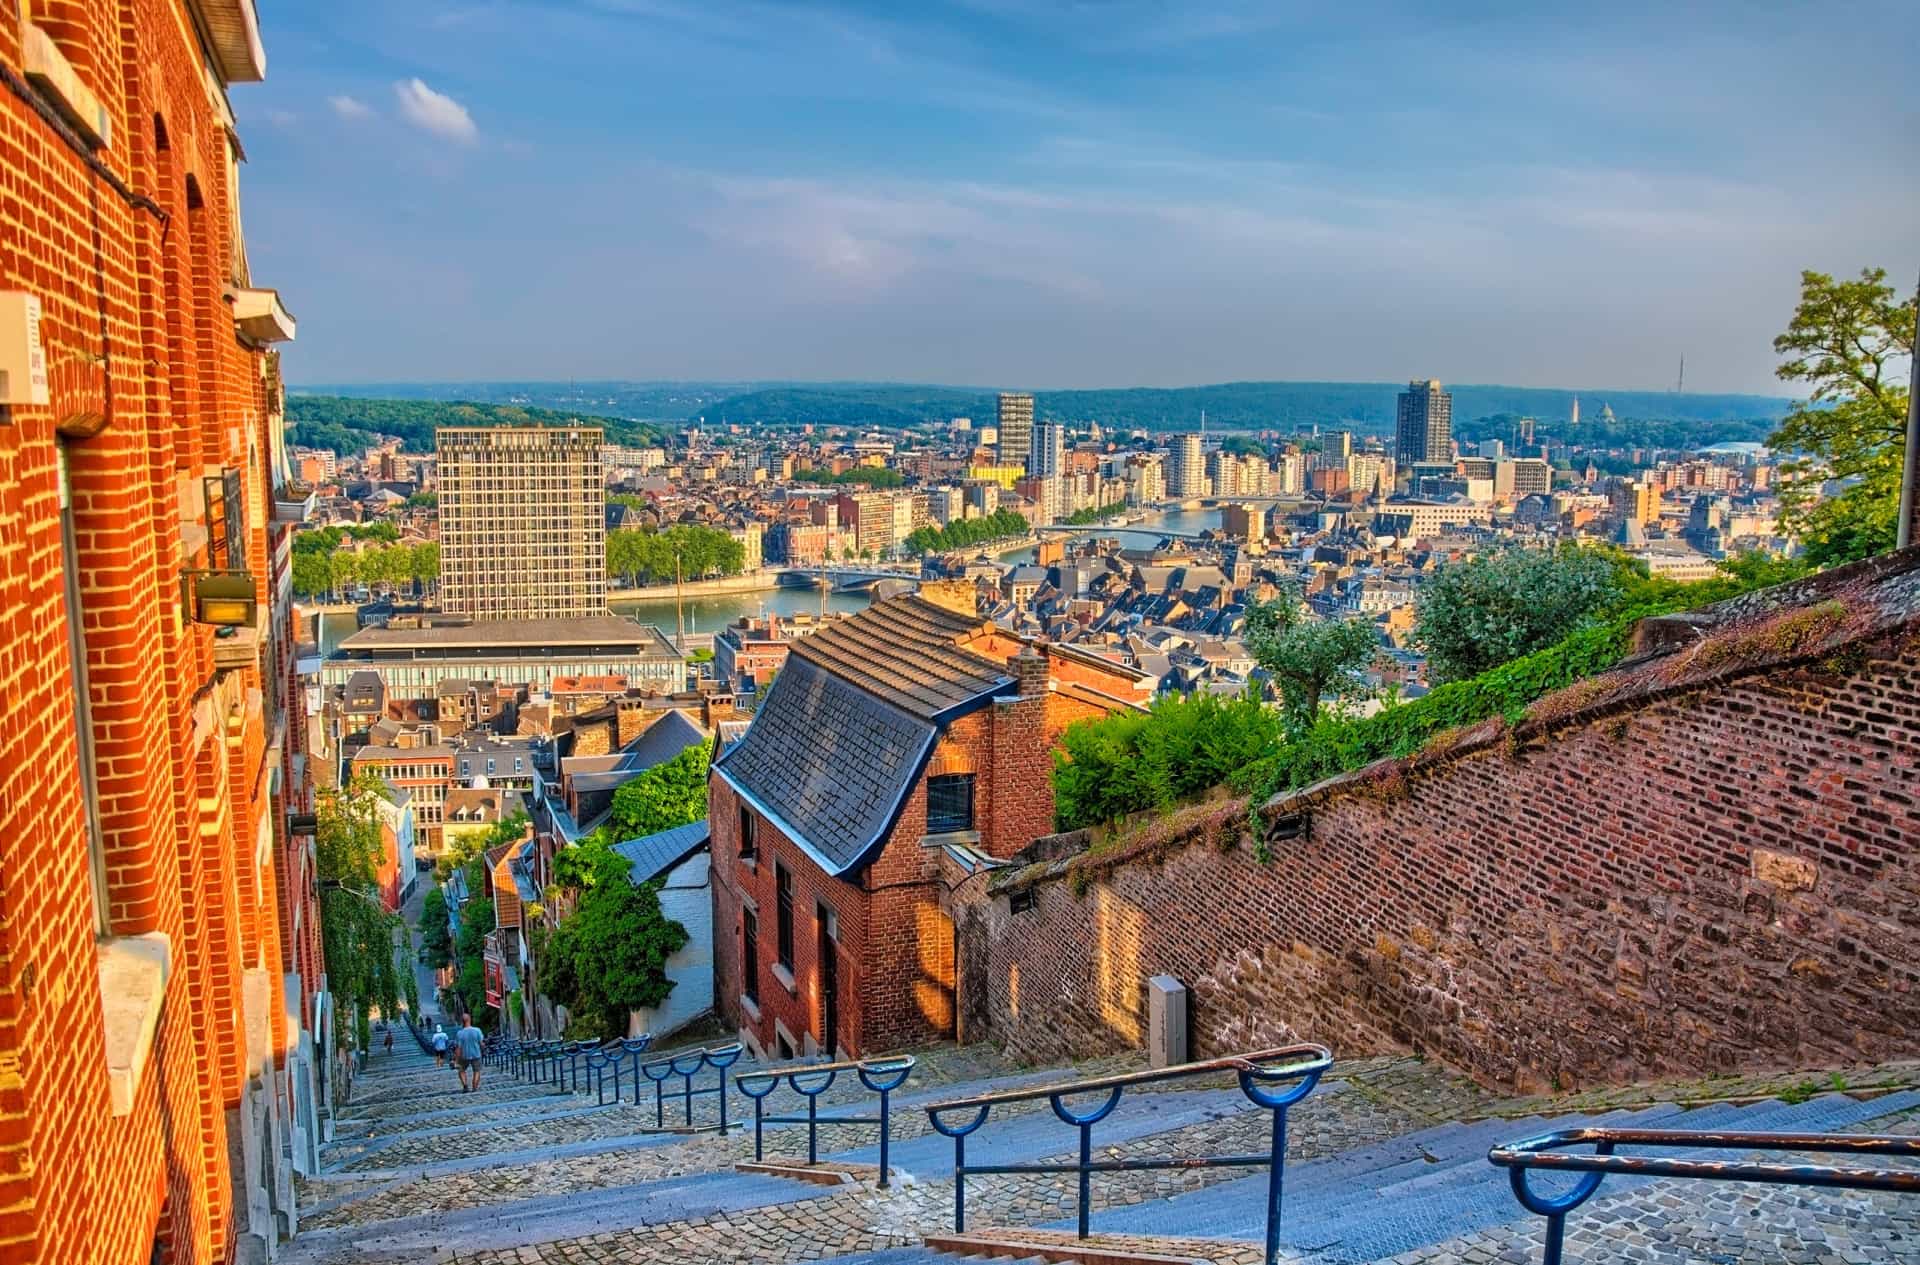 <p>The city of Liège, also called "the Ardent City," will amaze you with its medieval past. And if there's one place you must see, it's Montagne de Bueren. The 374-step staircase was ranked number one on <a href="https://www.huffpost.com/entry/extreme-staircases_n_3896079?utm_hp_ref=tw">Huffington Post's</a> list of "The Most Extreme Staircases."</p>